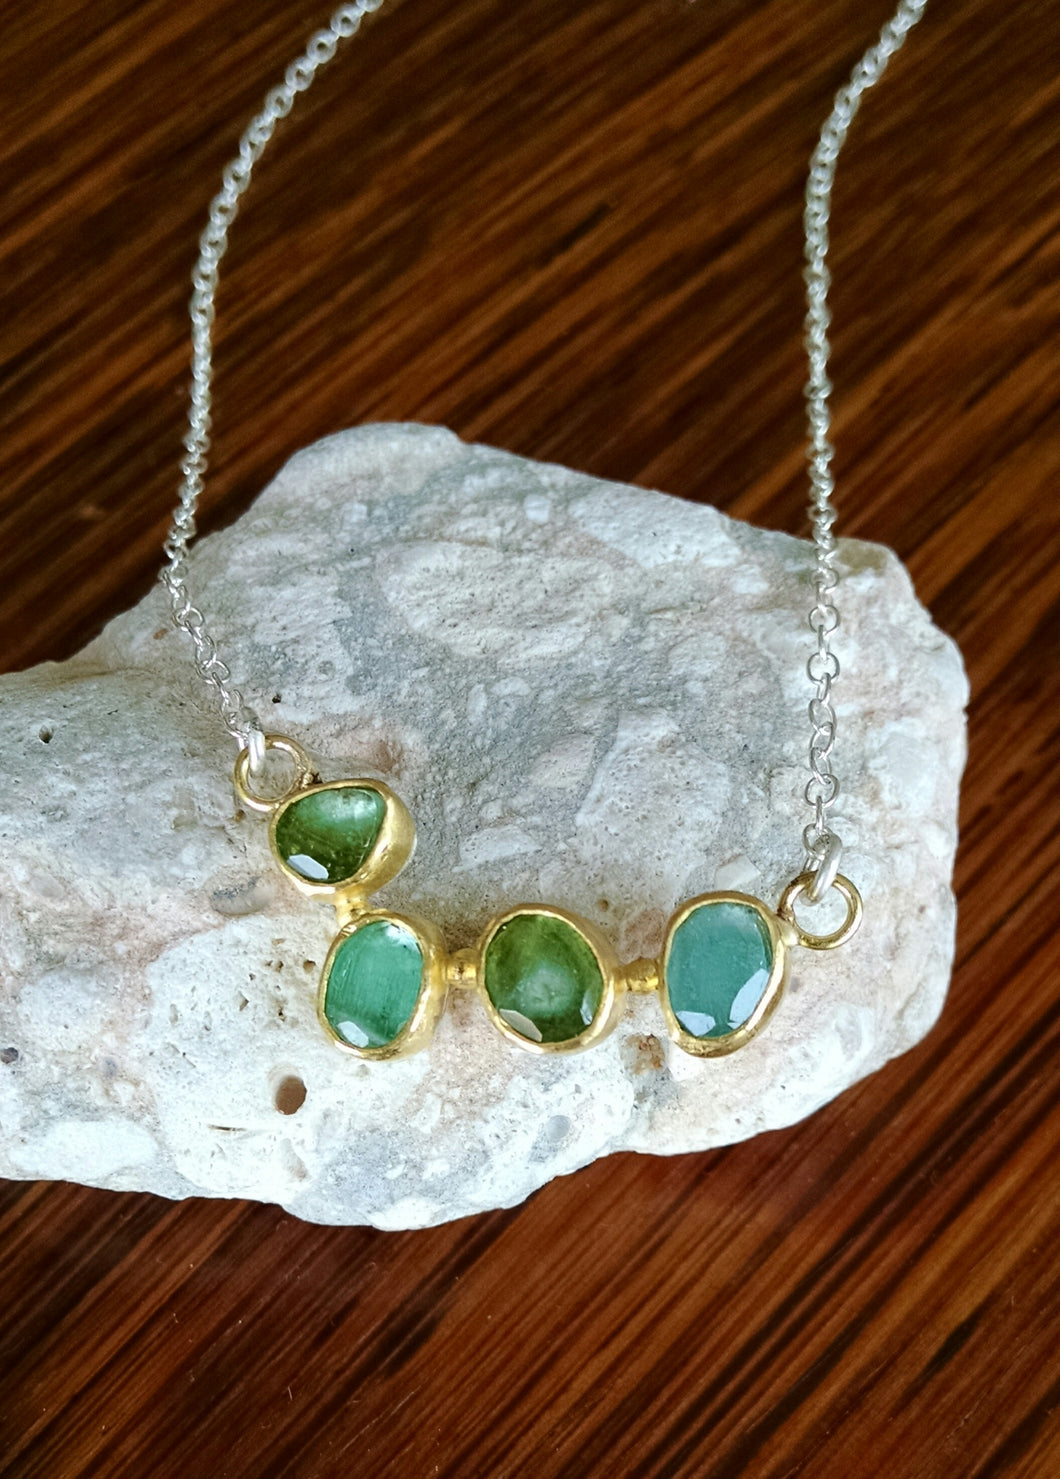 Four tourmalines in gold and silver necklace